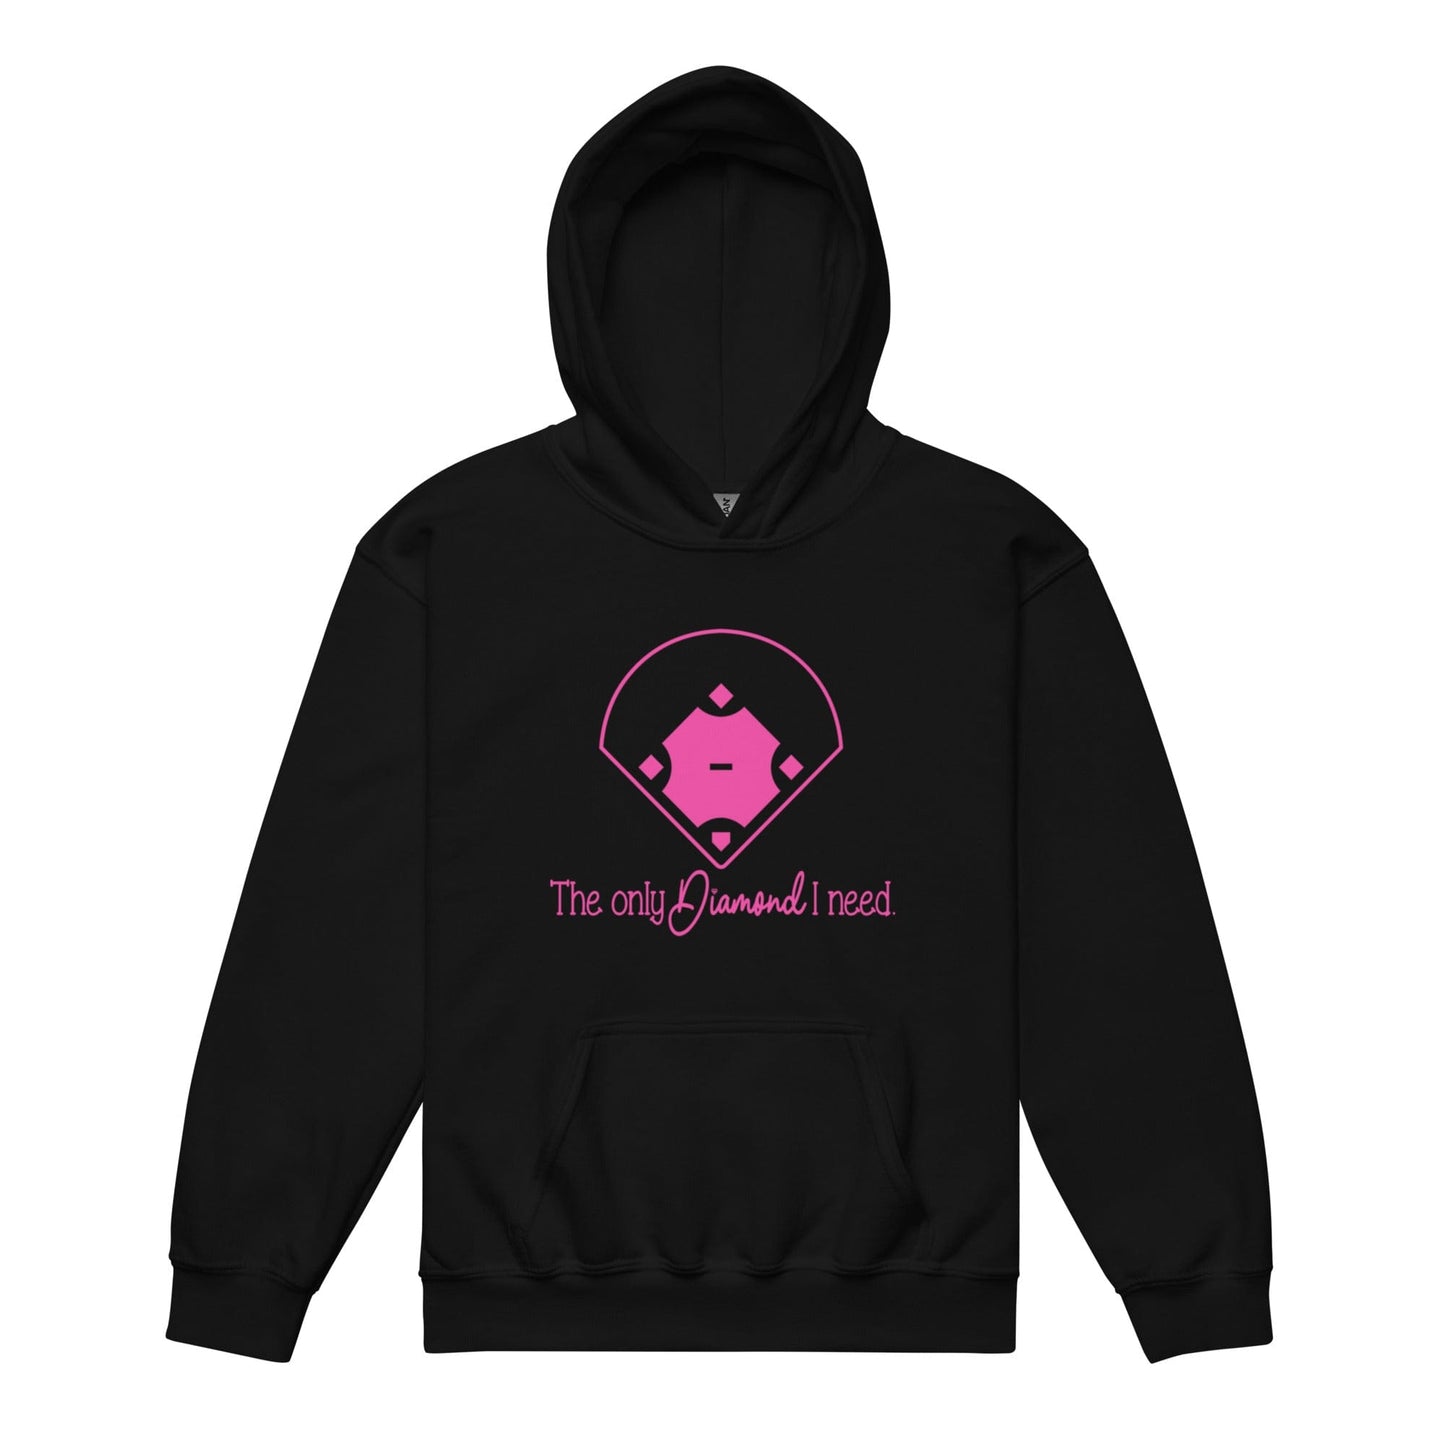 The Only Diamond I Need - Youth Hoodie